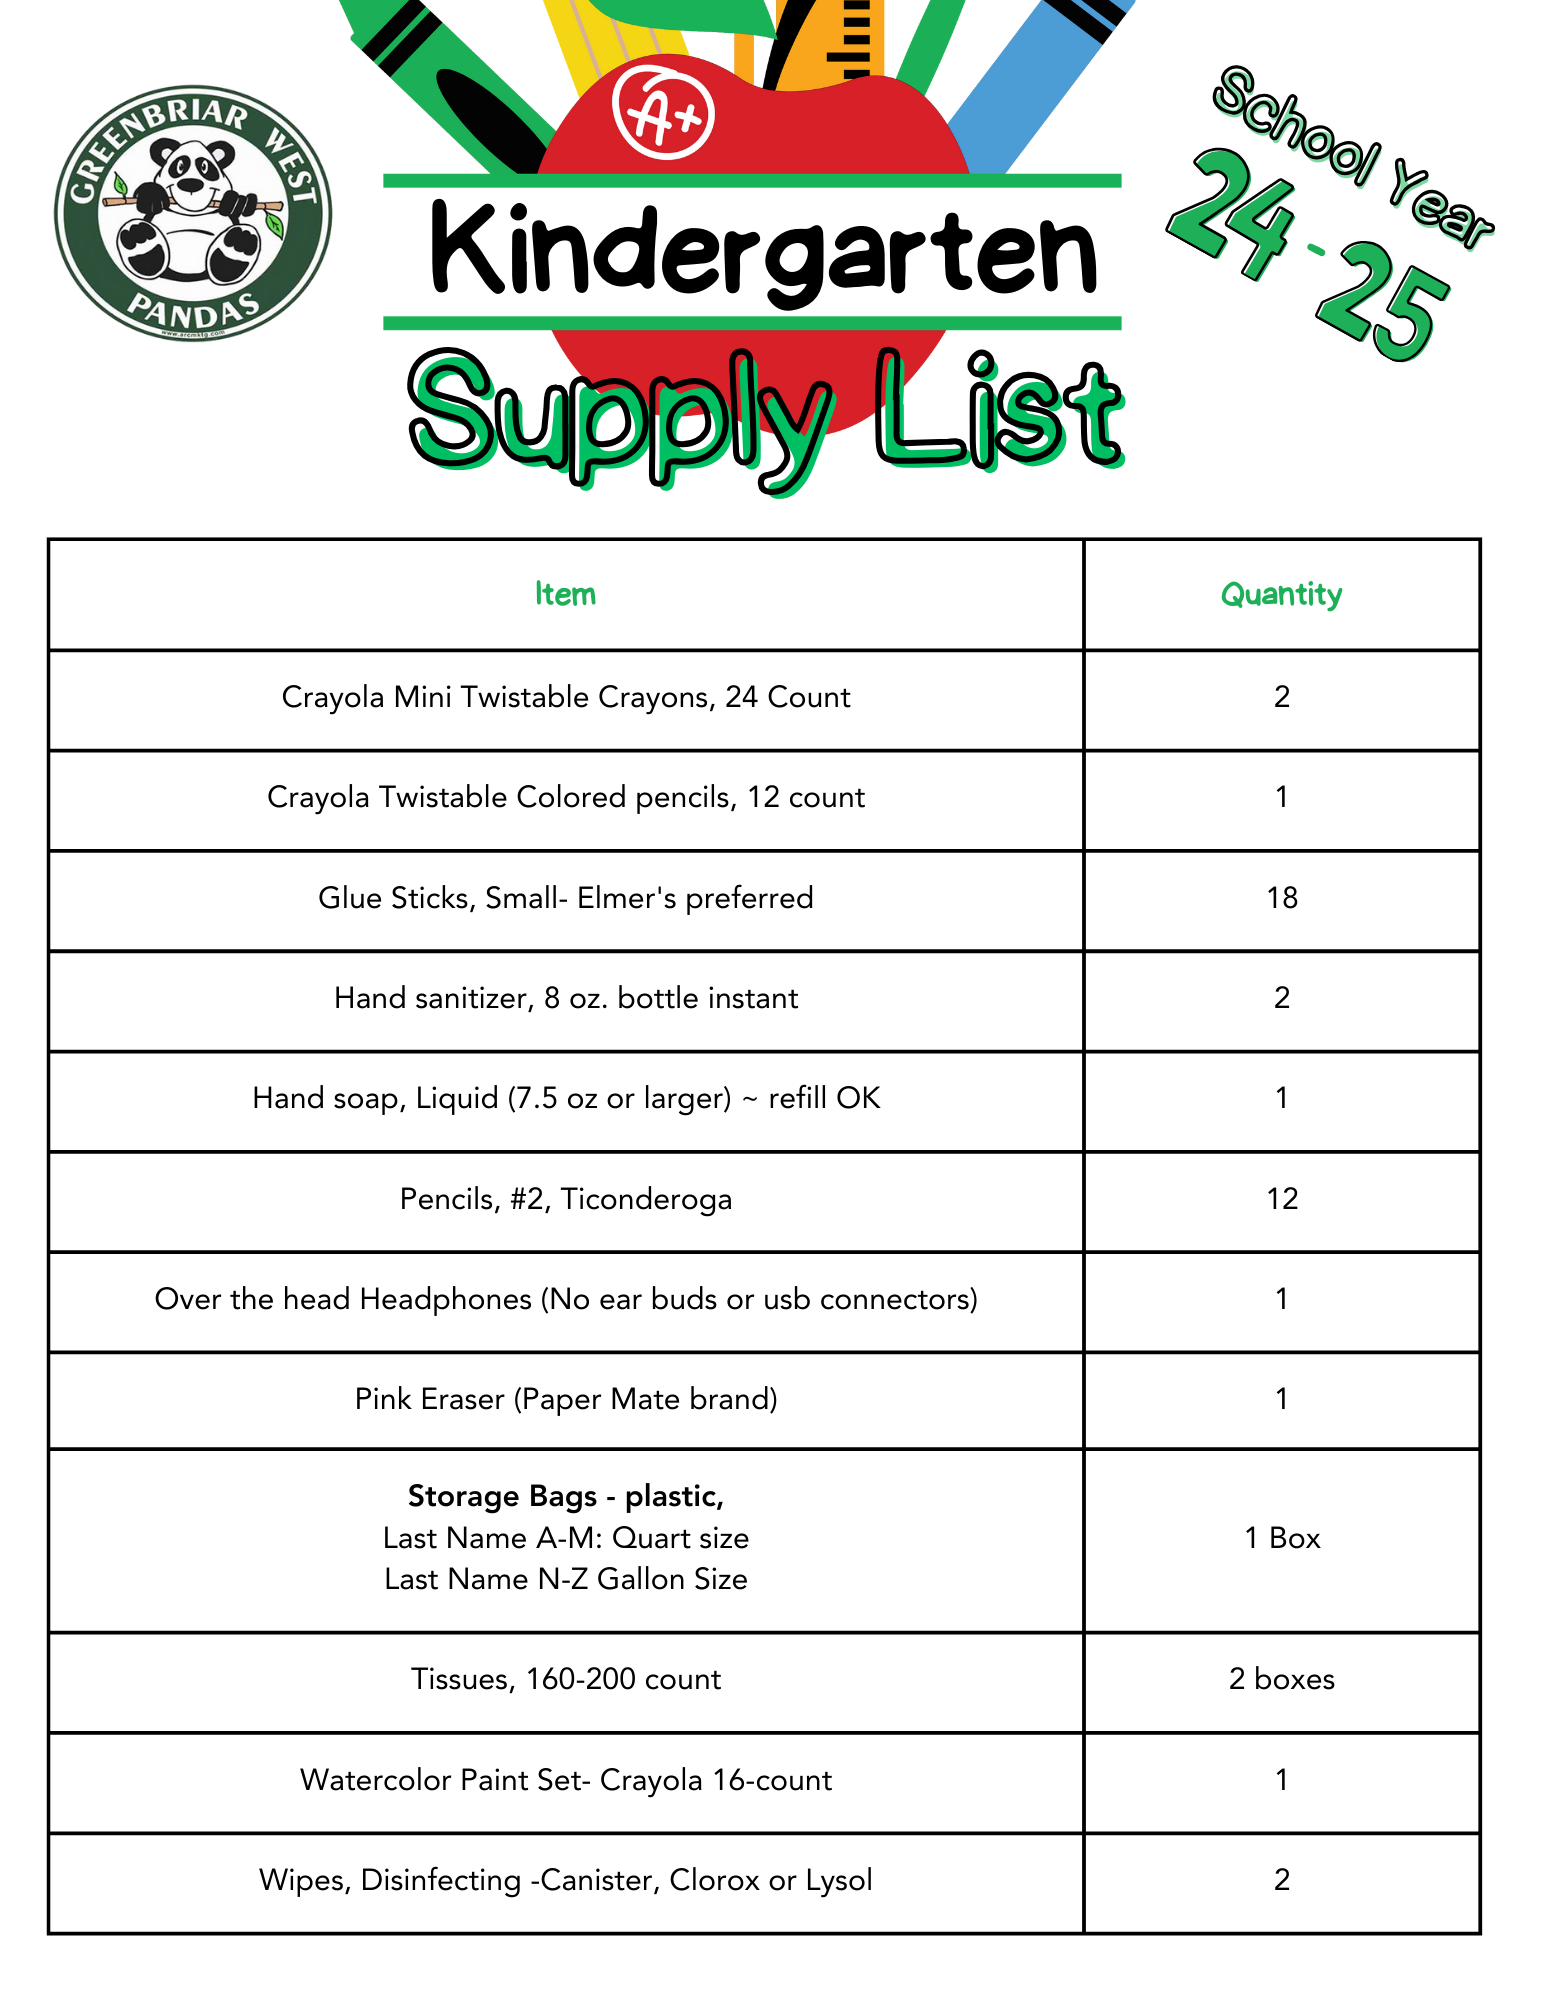 Supply list. please contact the school